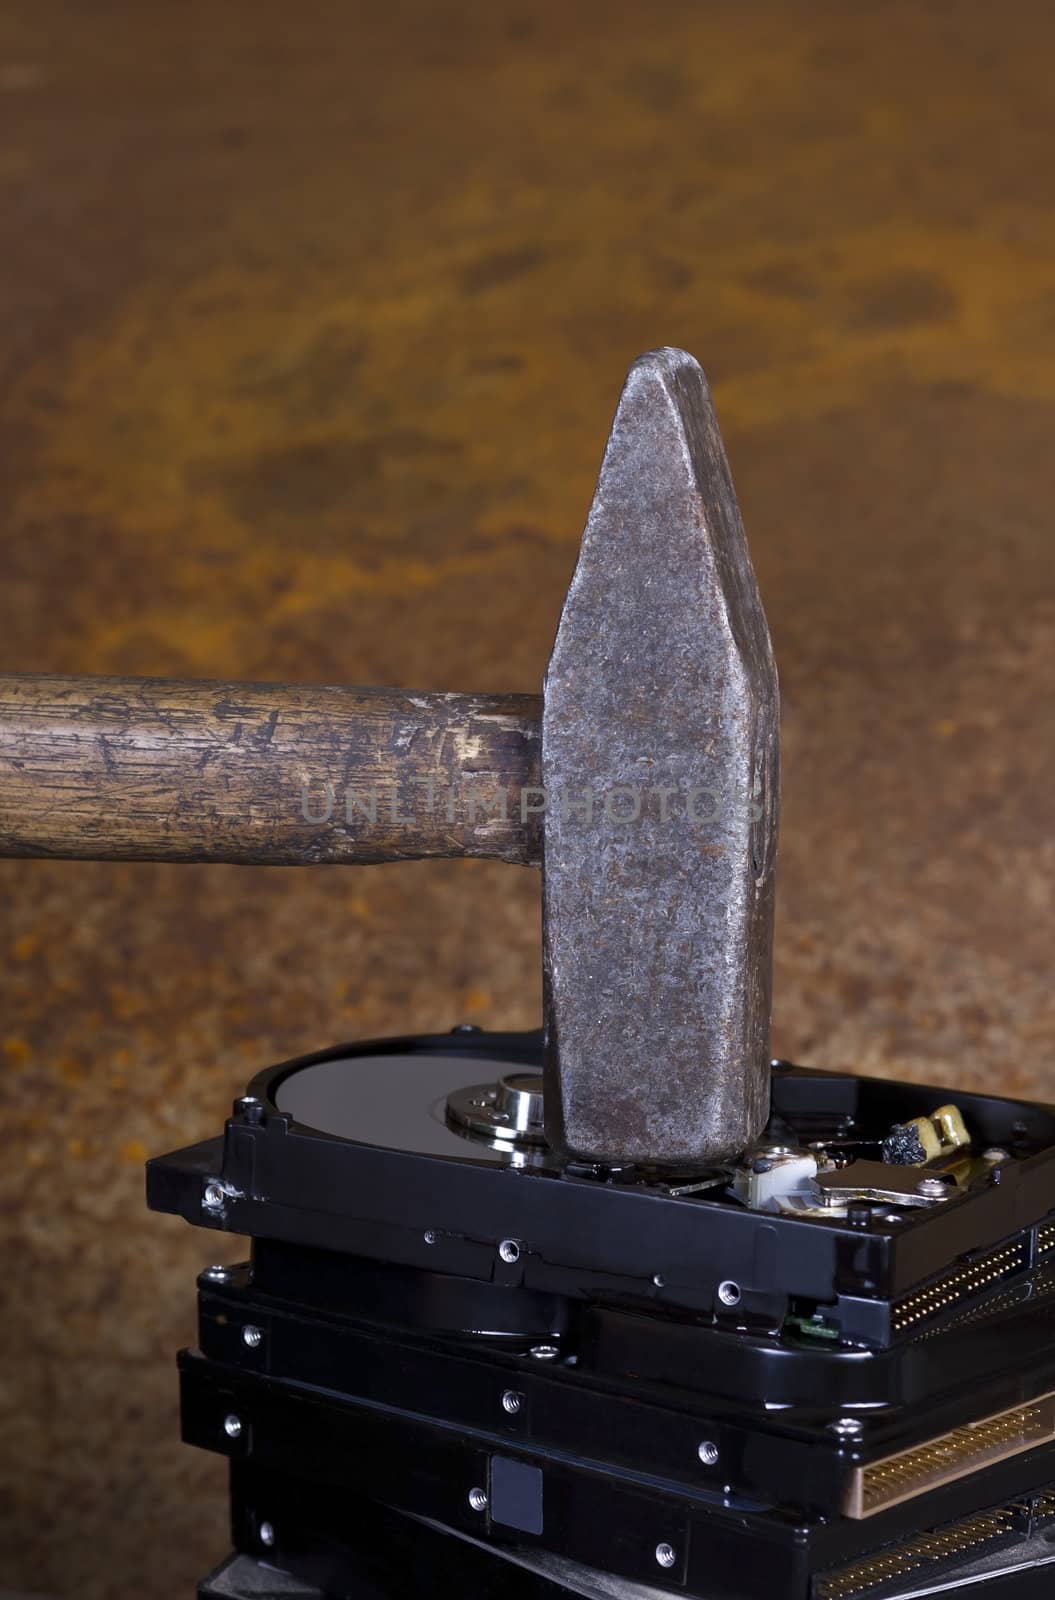 hammer on stack of hard disk by gewoldi